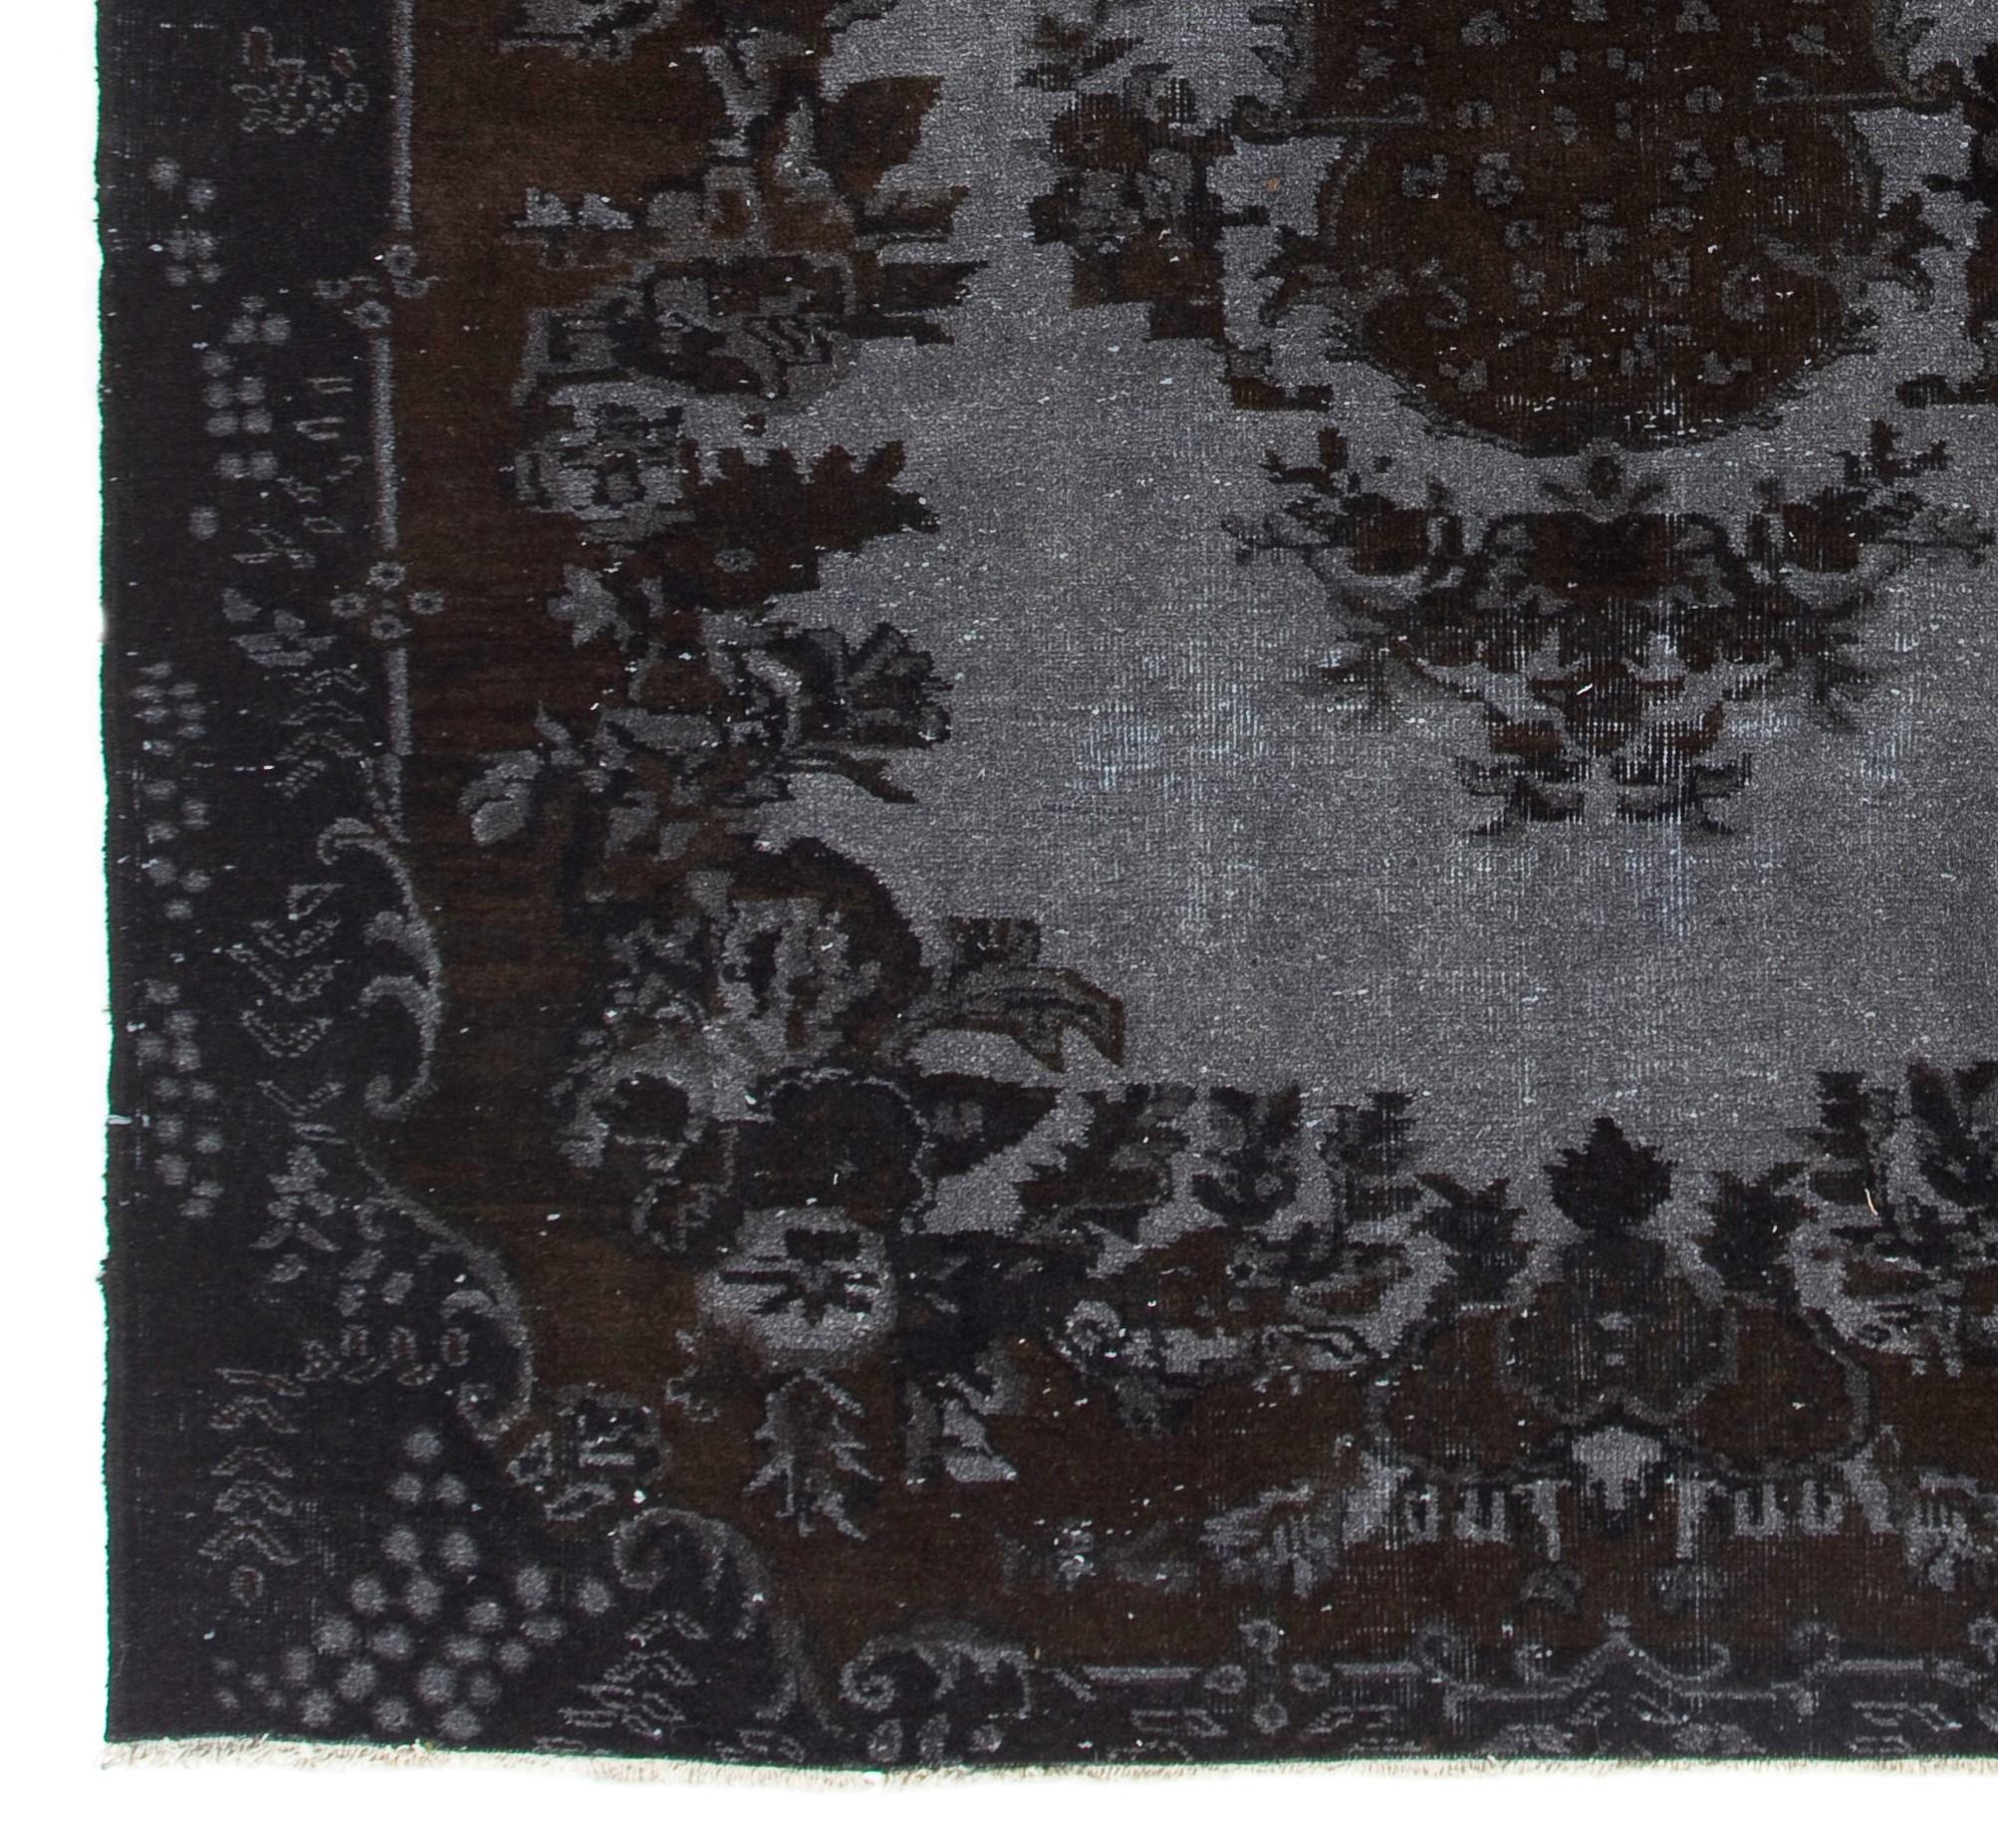 Modern 6.7x9.7 Ft Black Over-Dyed Handmade Vintage Turkish Rug with High and Low Pile